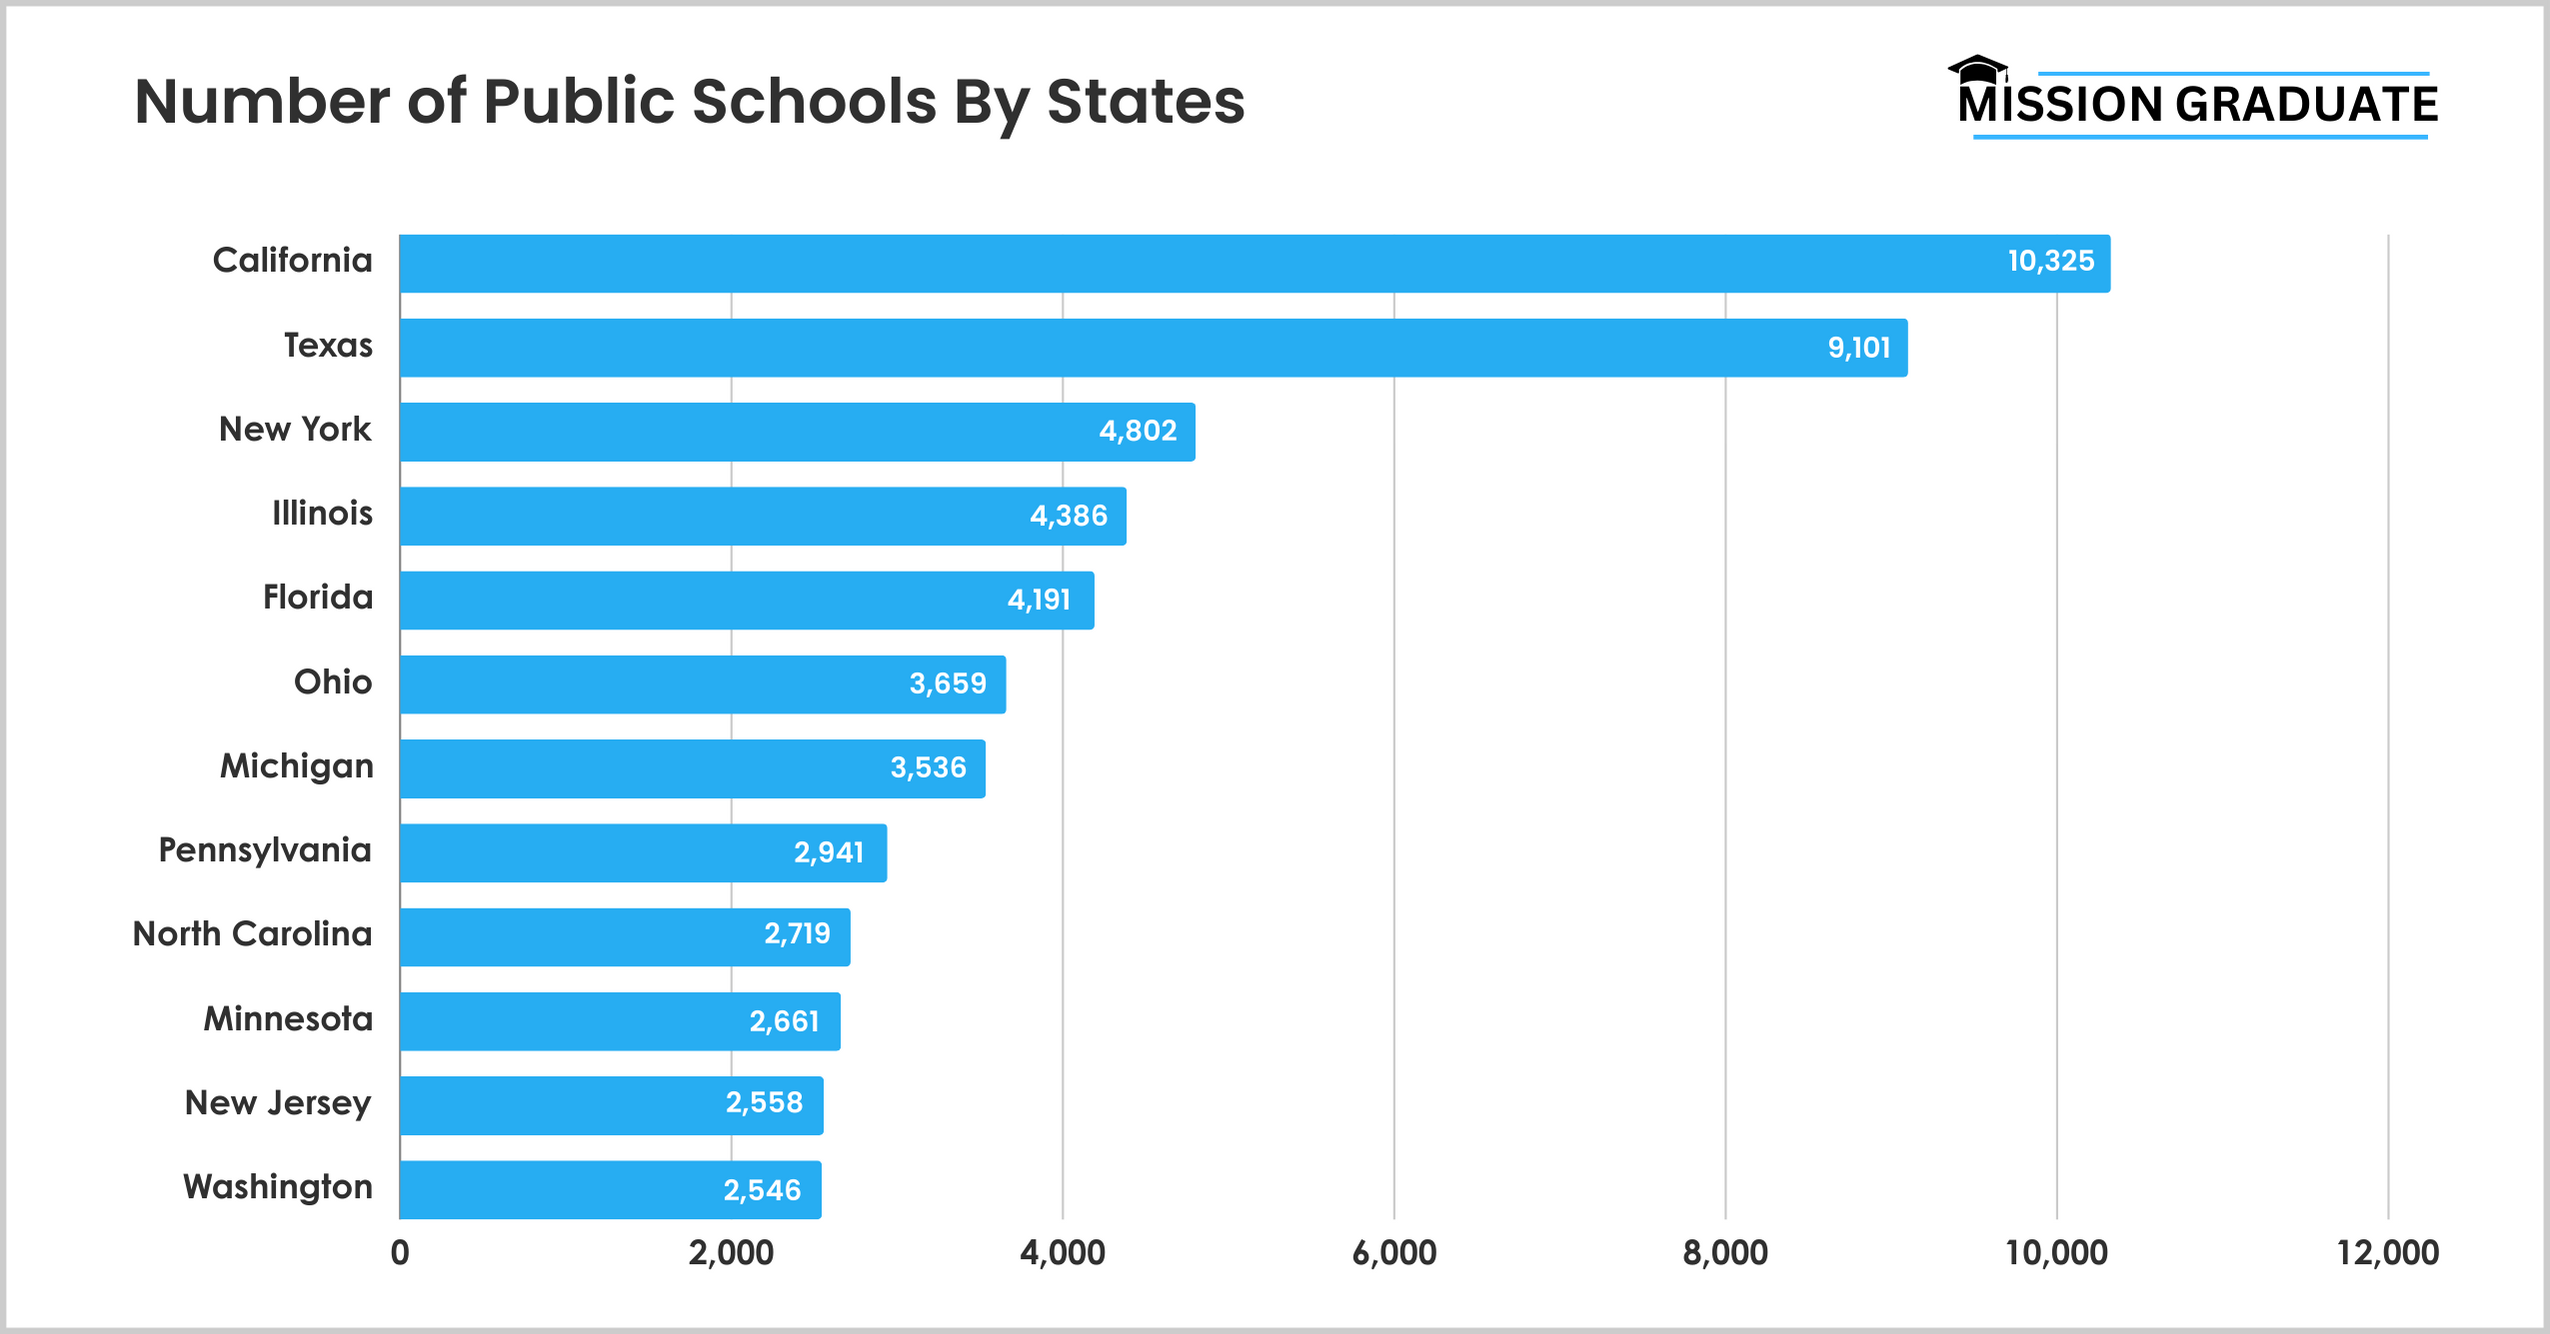 Number of Public Schools By States